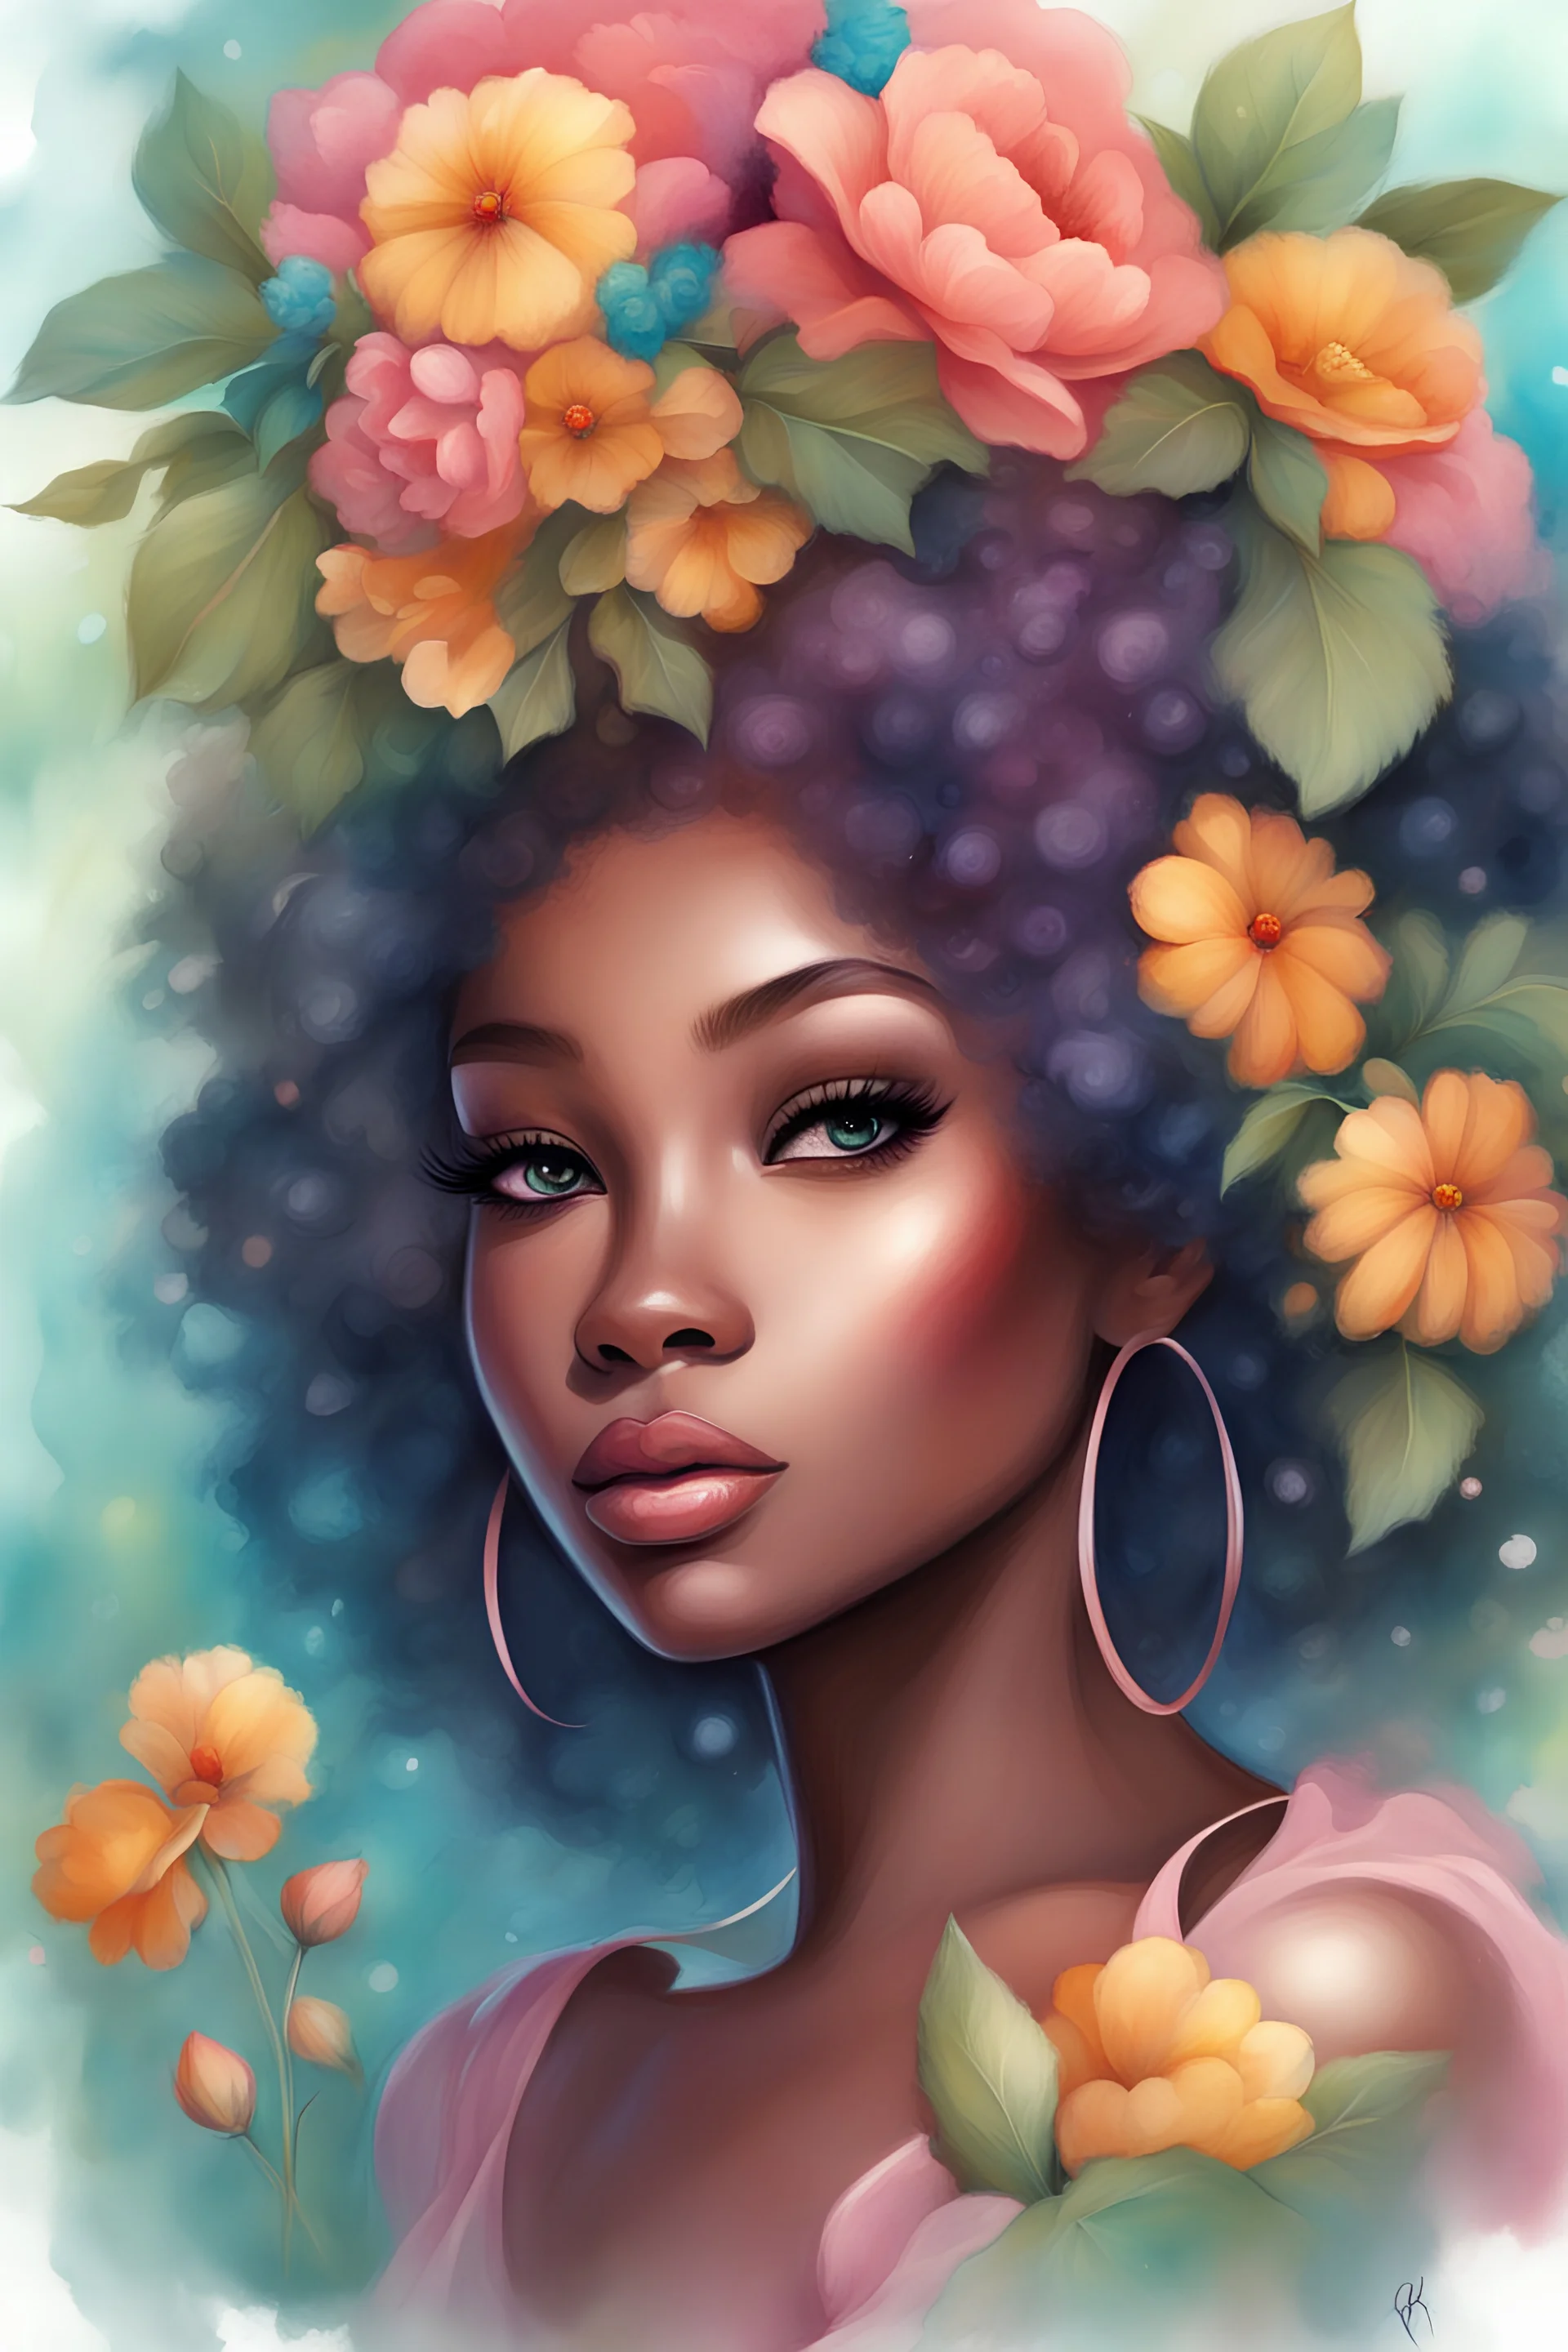 a painting of an African American woman with flowers in her hair, rossdraws pastel vibrant, beautiful fantasy art portrait, by Jeremiah Ketner, beautiful fantasy portrait, girl in flowers, woman in flowers, beautiful anime portrait, inspired by Anna Dittmann, colorful watercolor painting, watercolor detailed art, vibrant watercolor painting, exquisite digital illustration, by Anna Dittmann, stunning anime face portrait